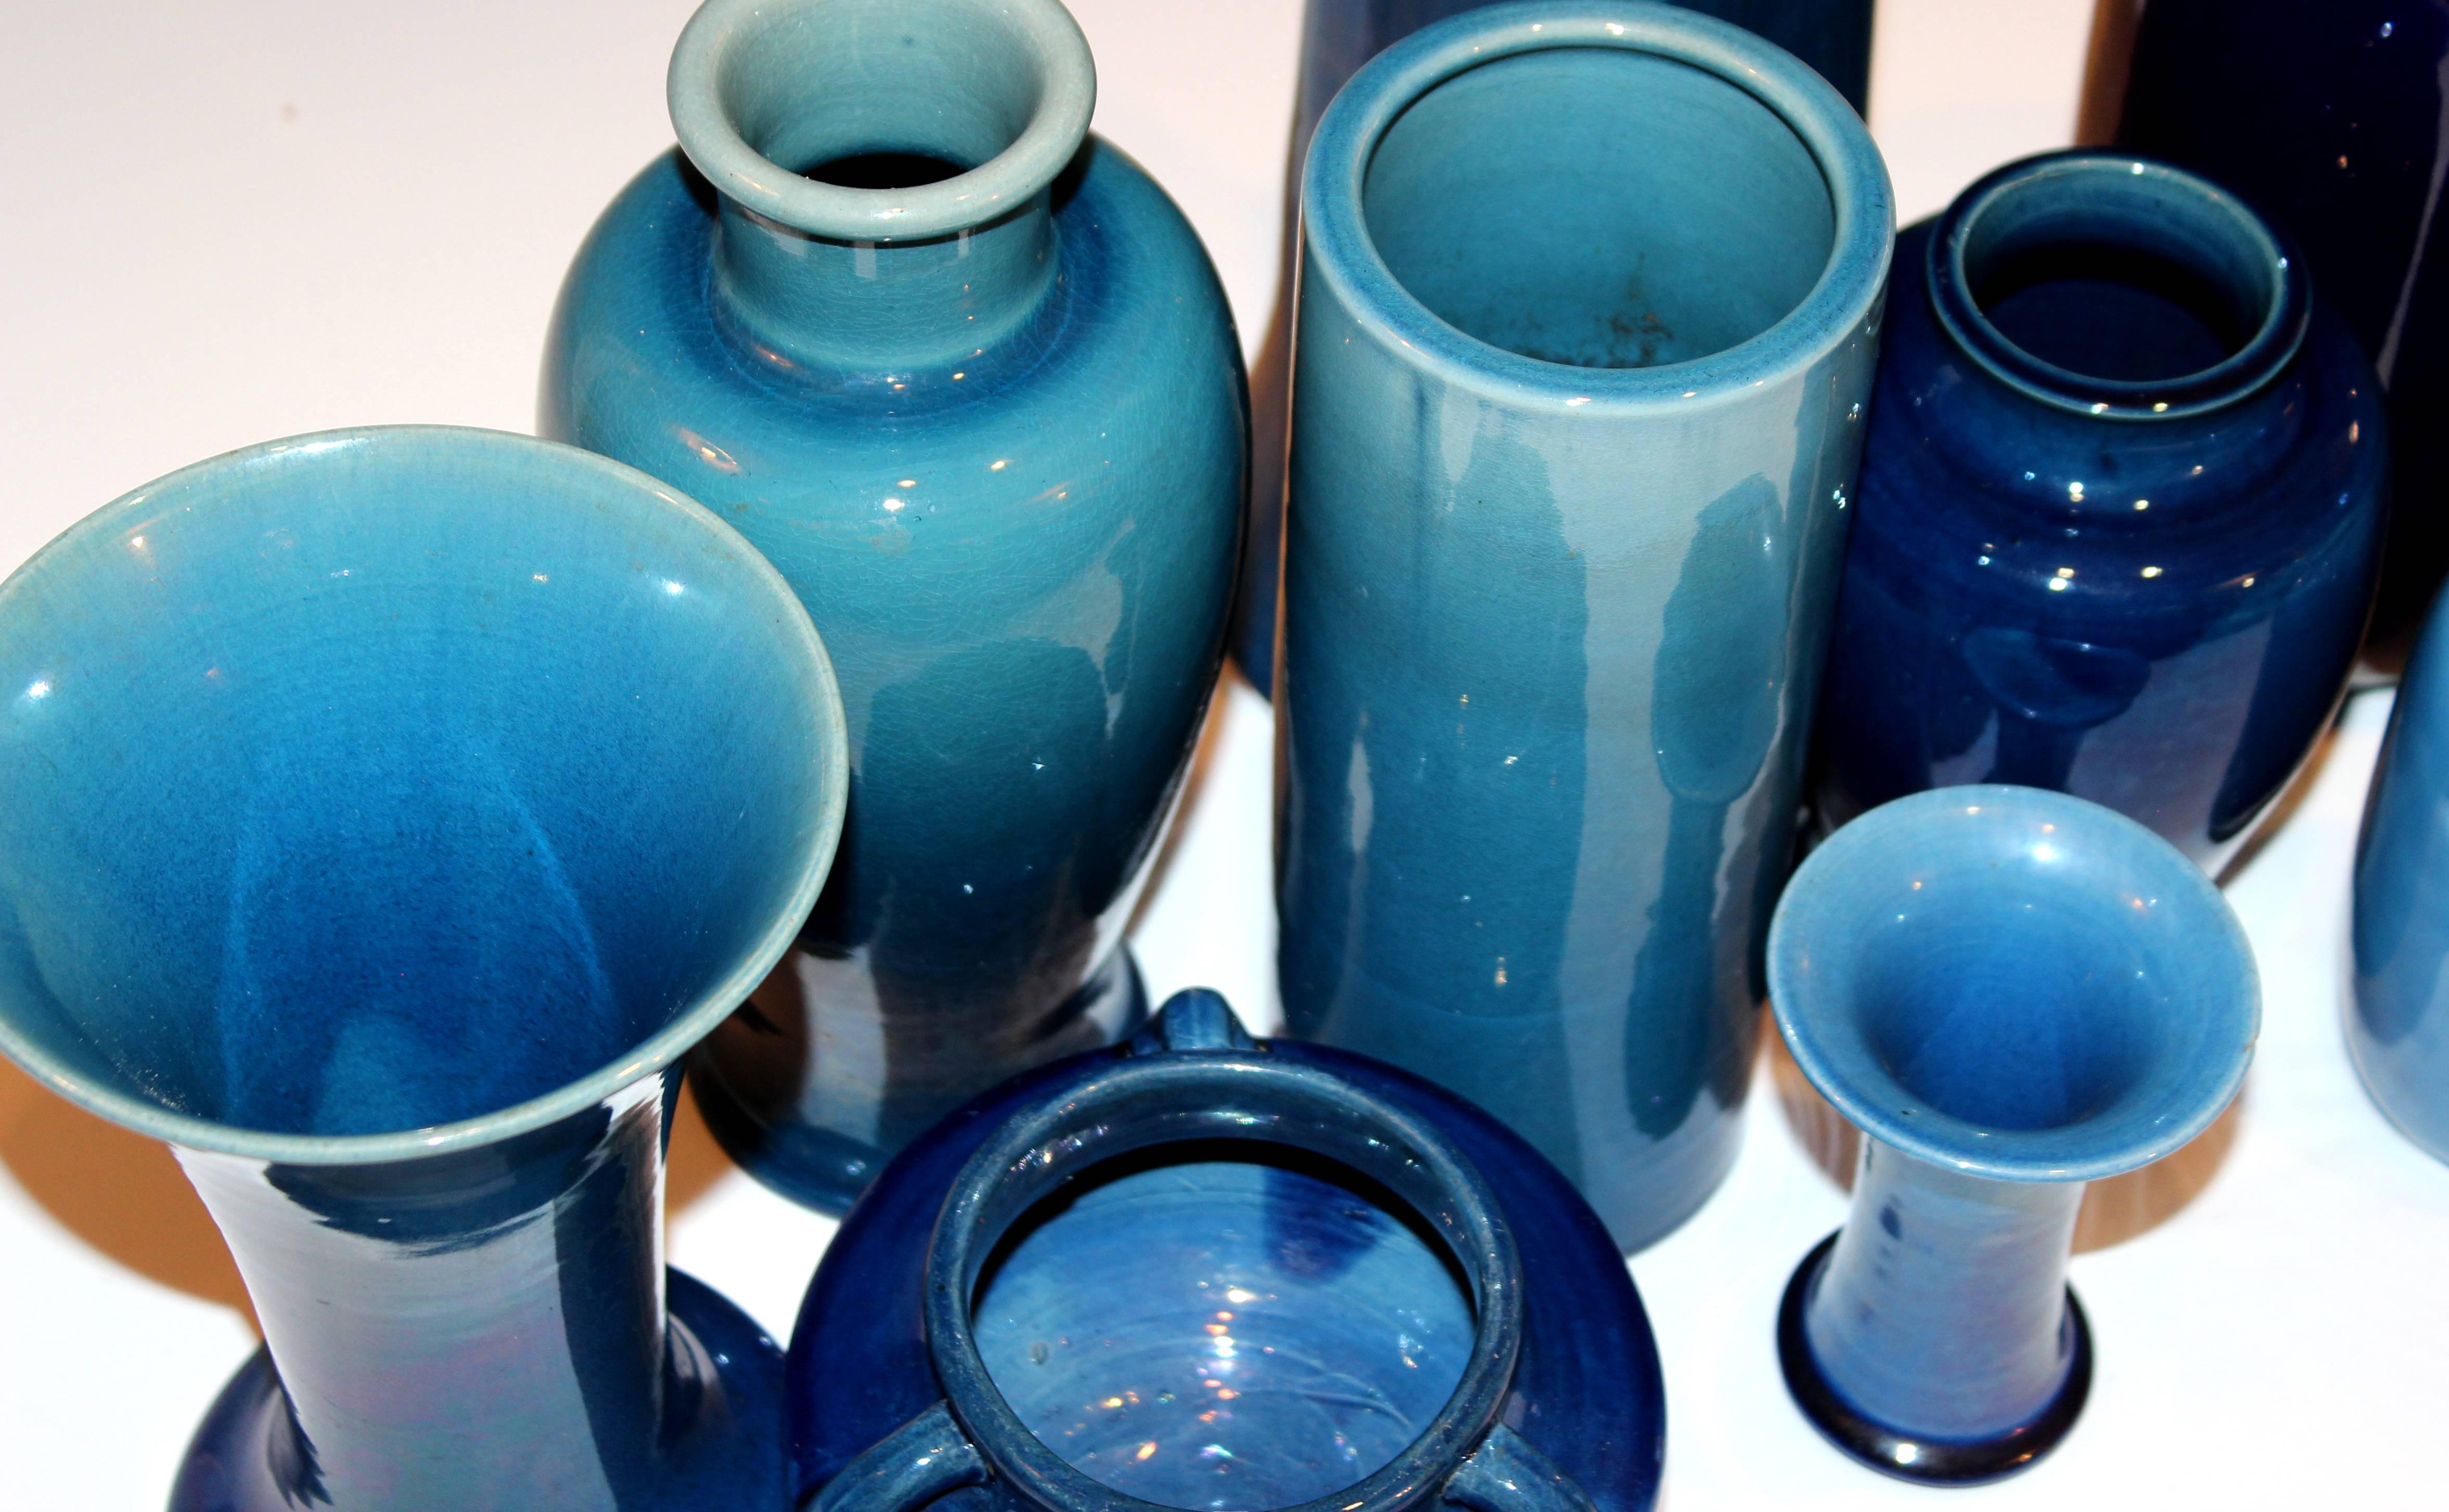 Arts and Crafts Set of Antique and Vintage Awaji Studio Pottery Vases Jars Shades of Blue